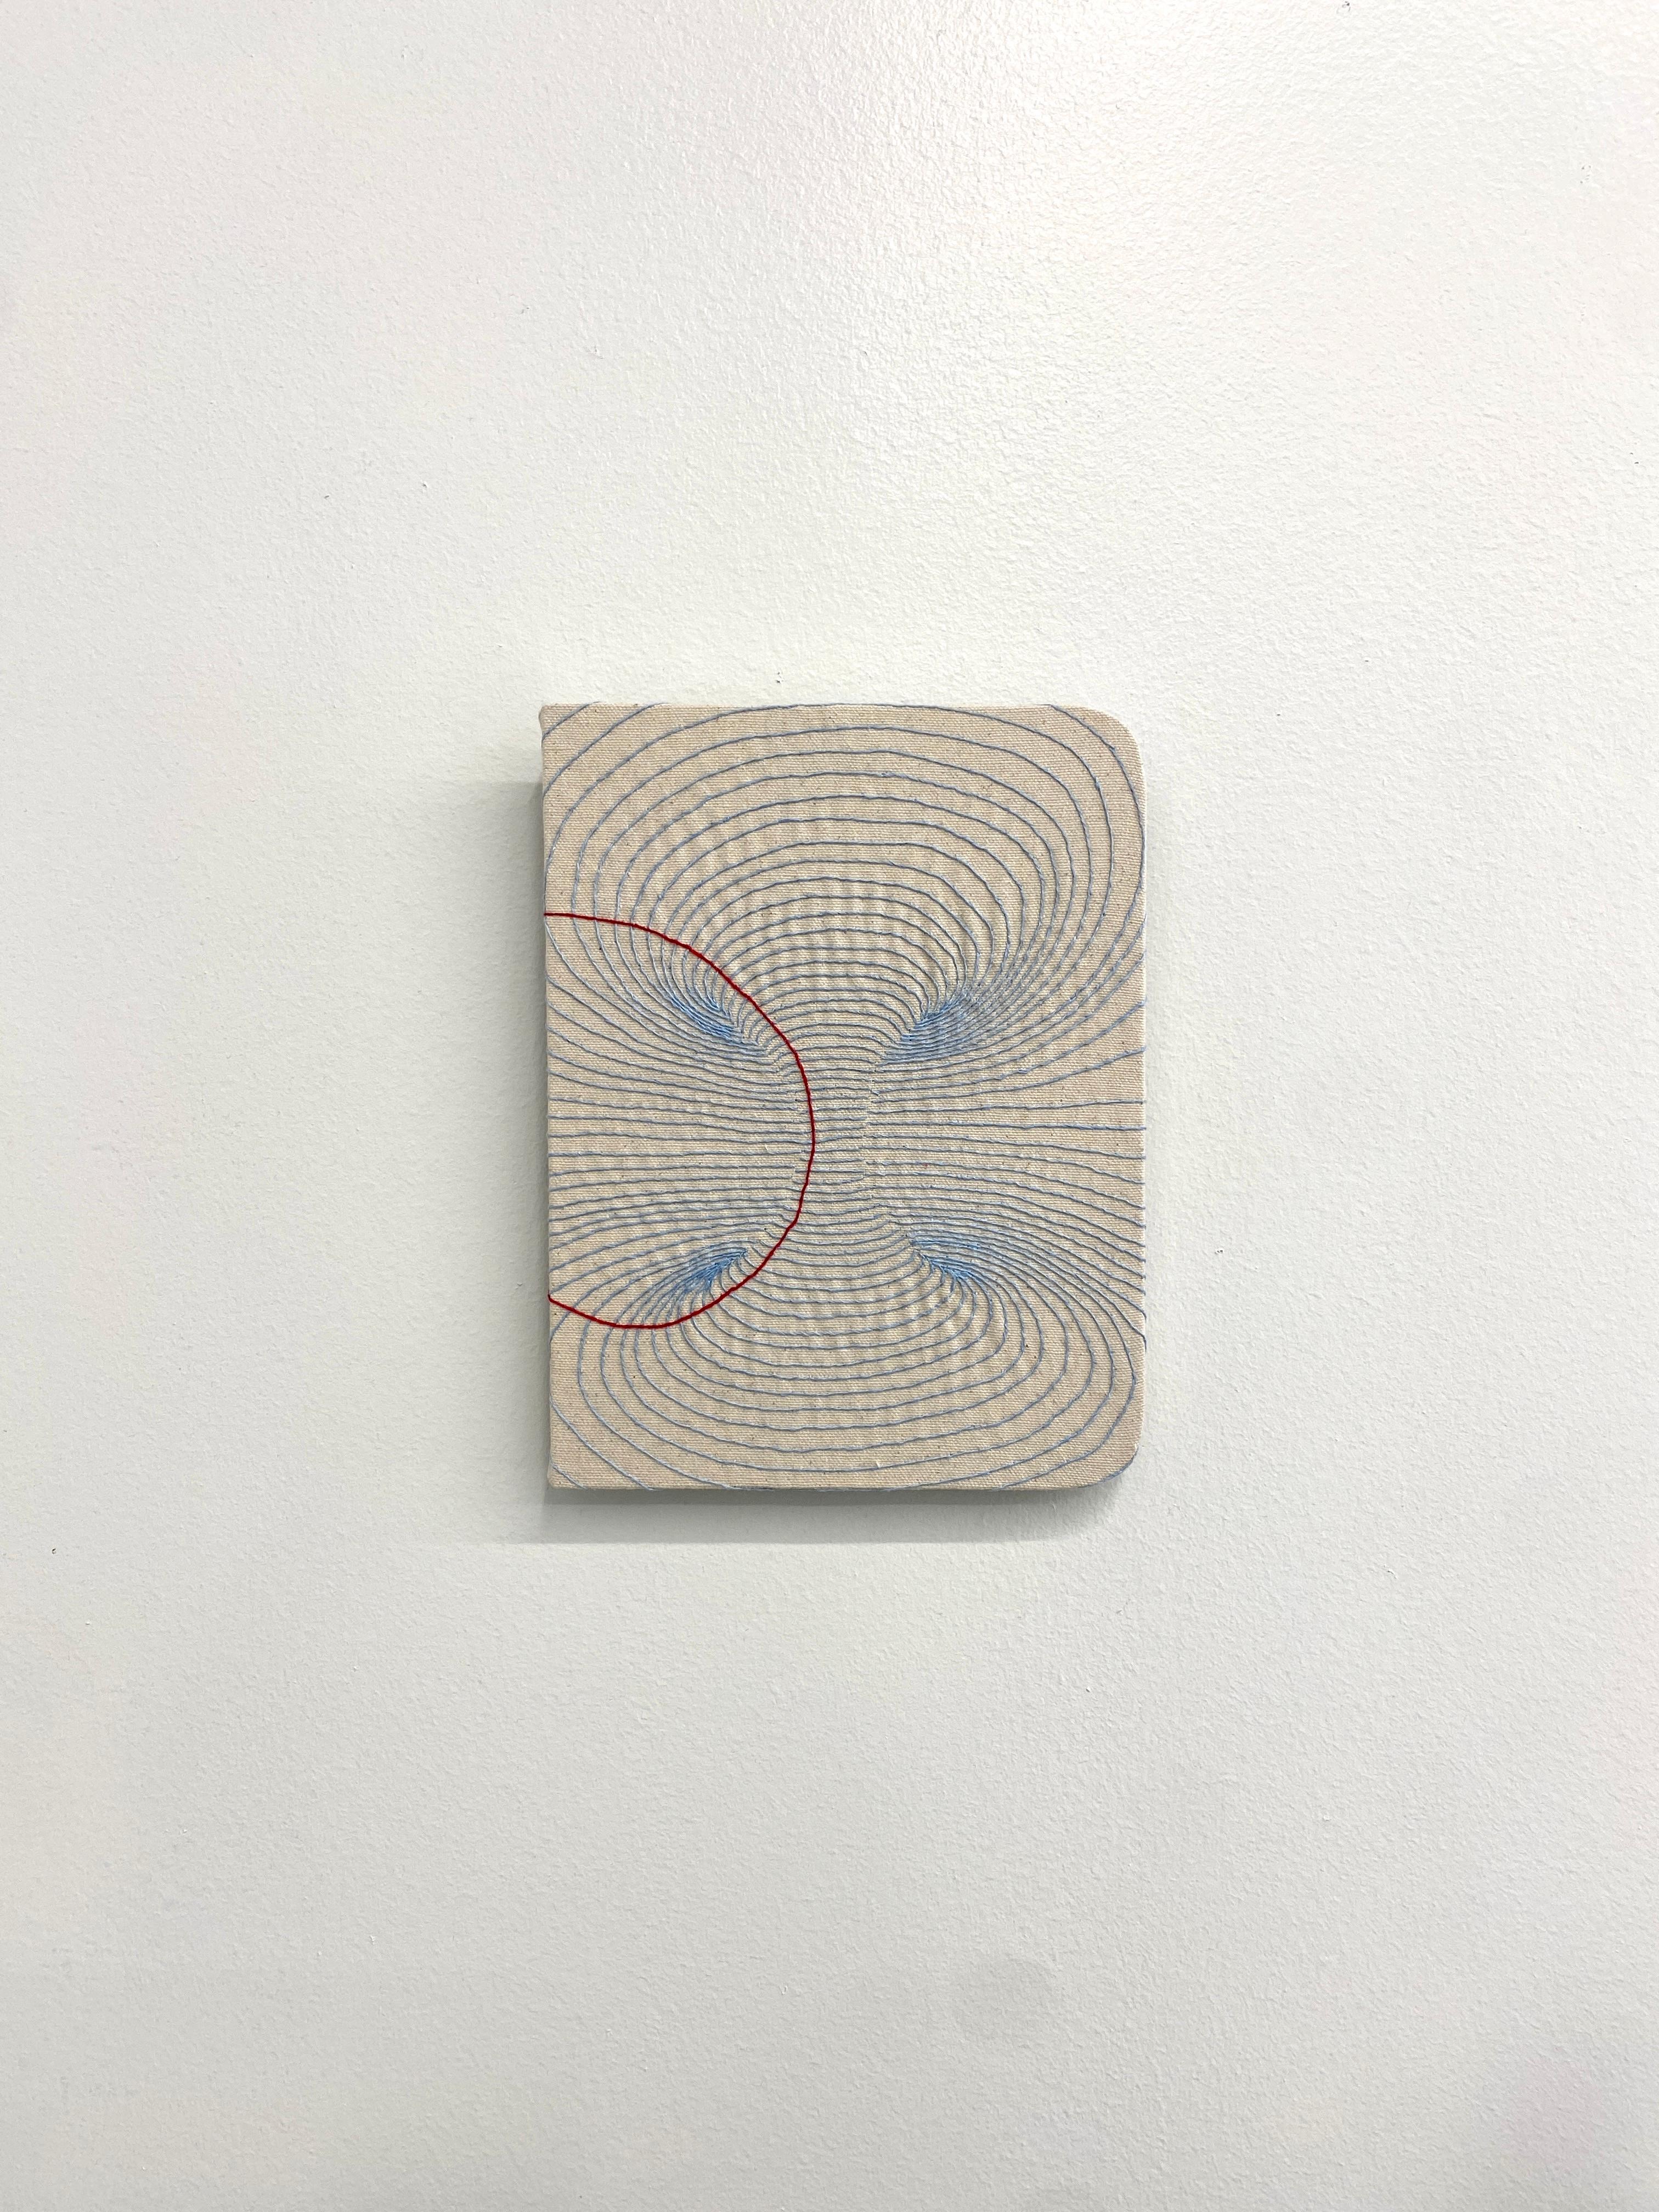 Notes for String Theory 040522, Contemporary Embroidery on Canvas, Hand Stitched - Sculpture by Candace Hicks